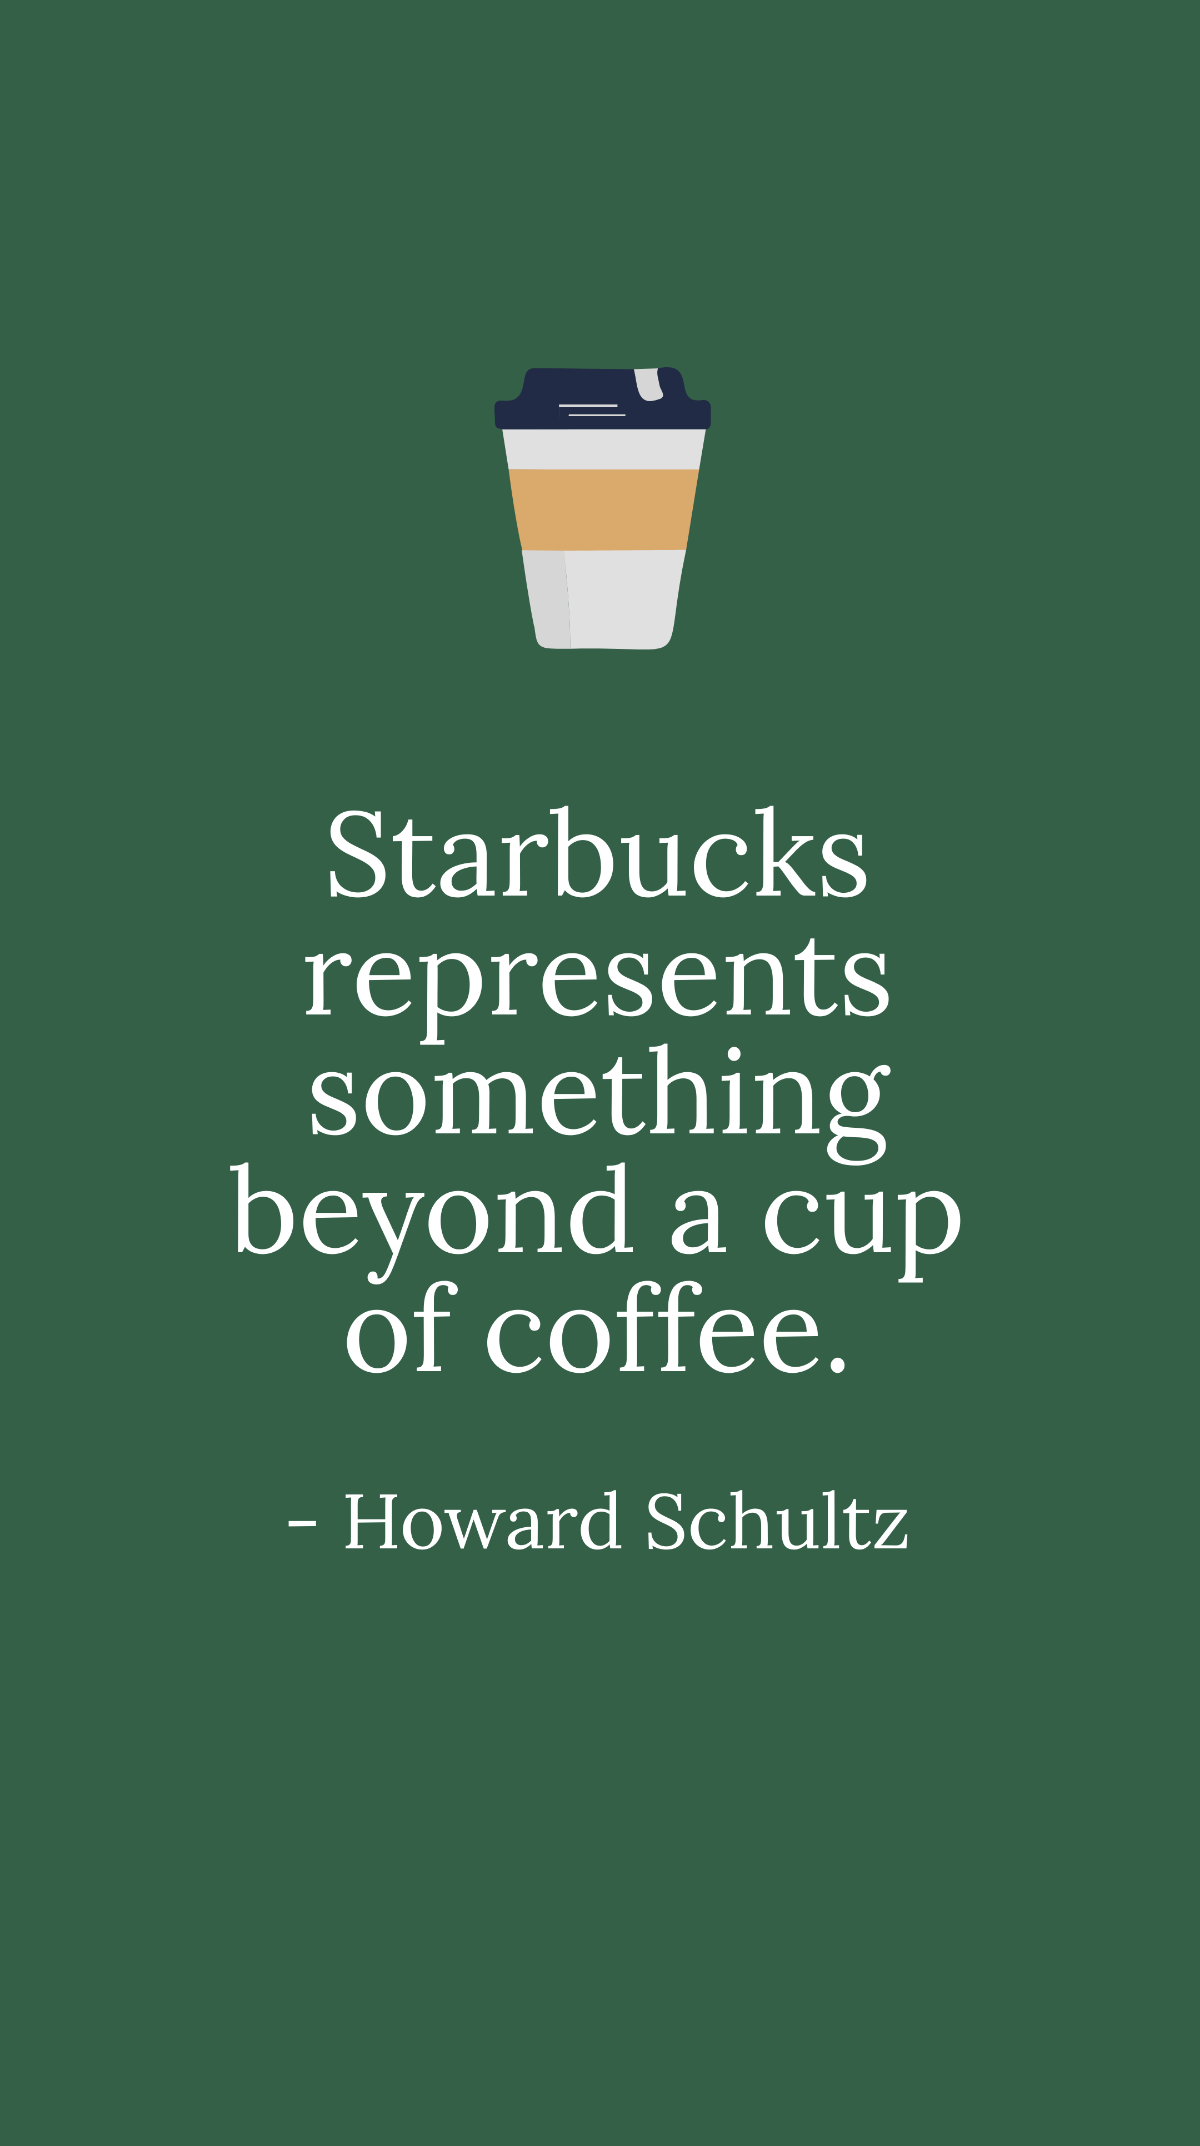 Howard Schultz - Starbucks represents something beyond a cup of coffee. Template